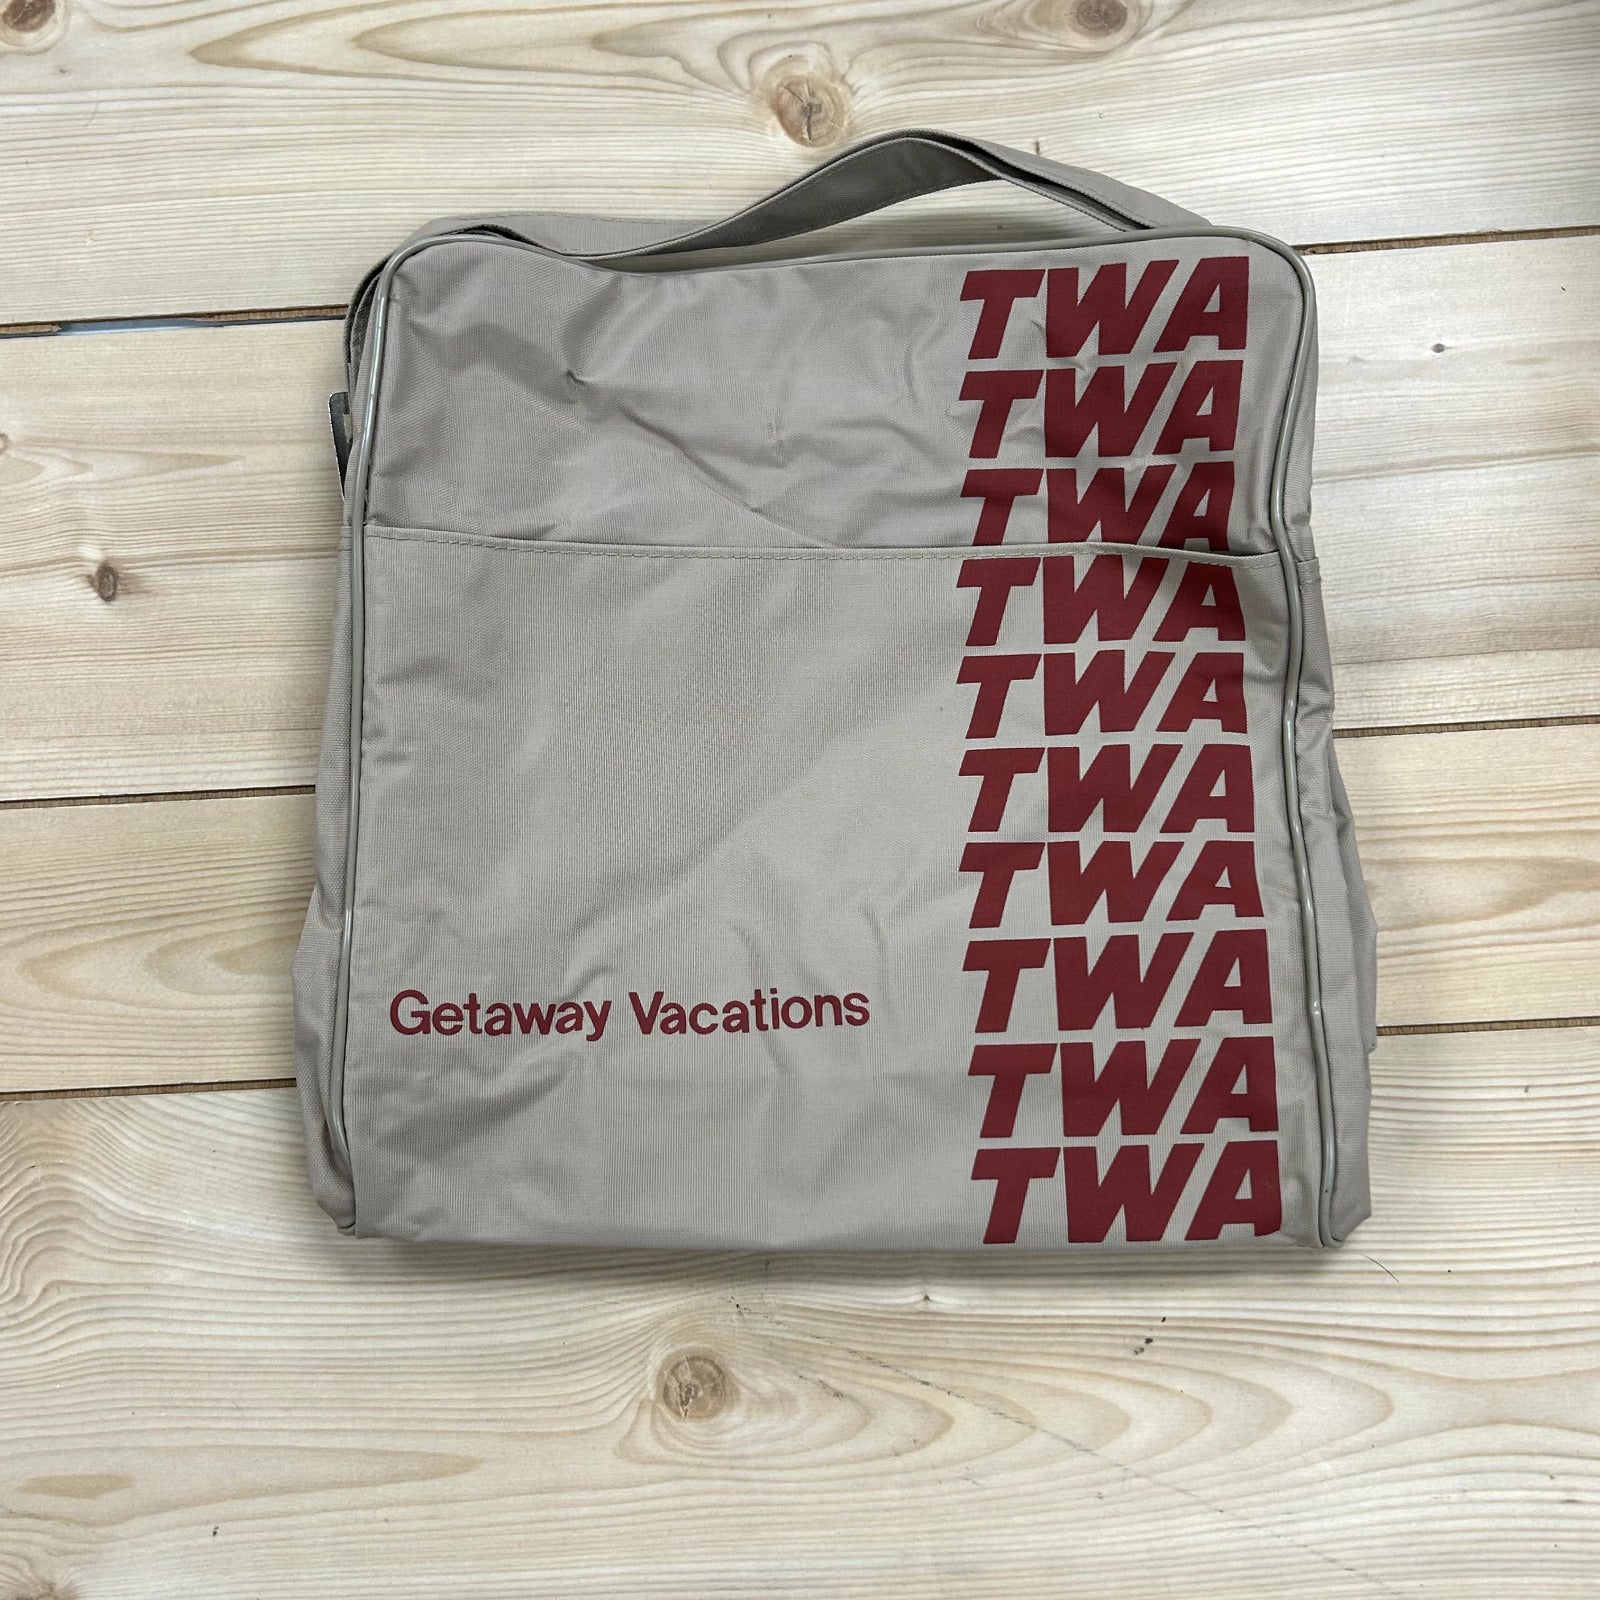 Vintage TWA Trans World Airlines Getaway Vacations Carry on Travel Bag Tote EUC